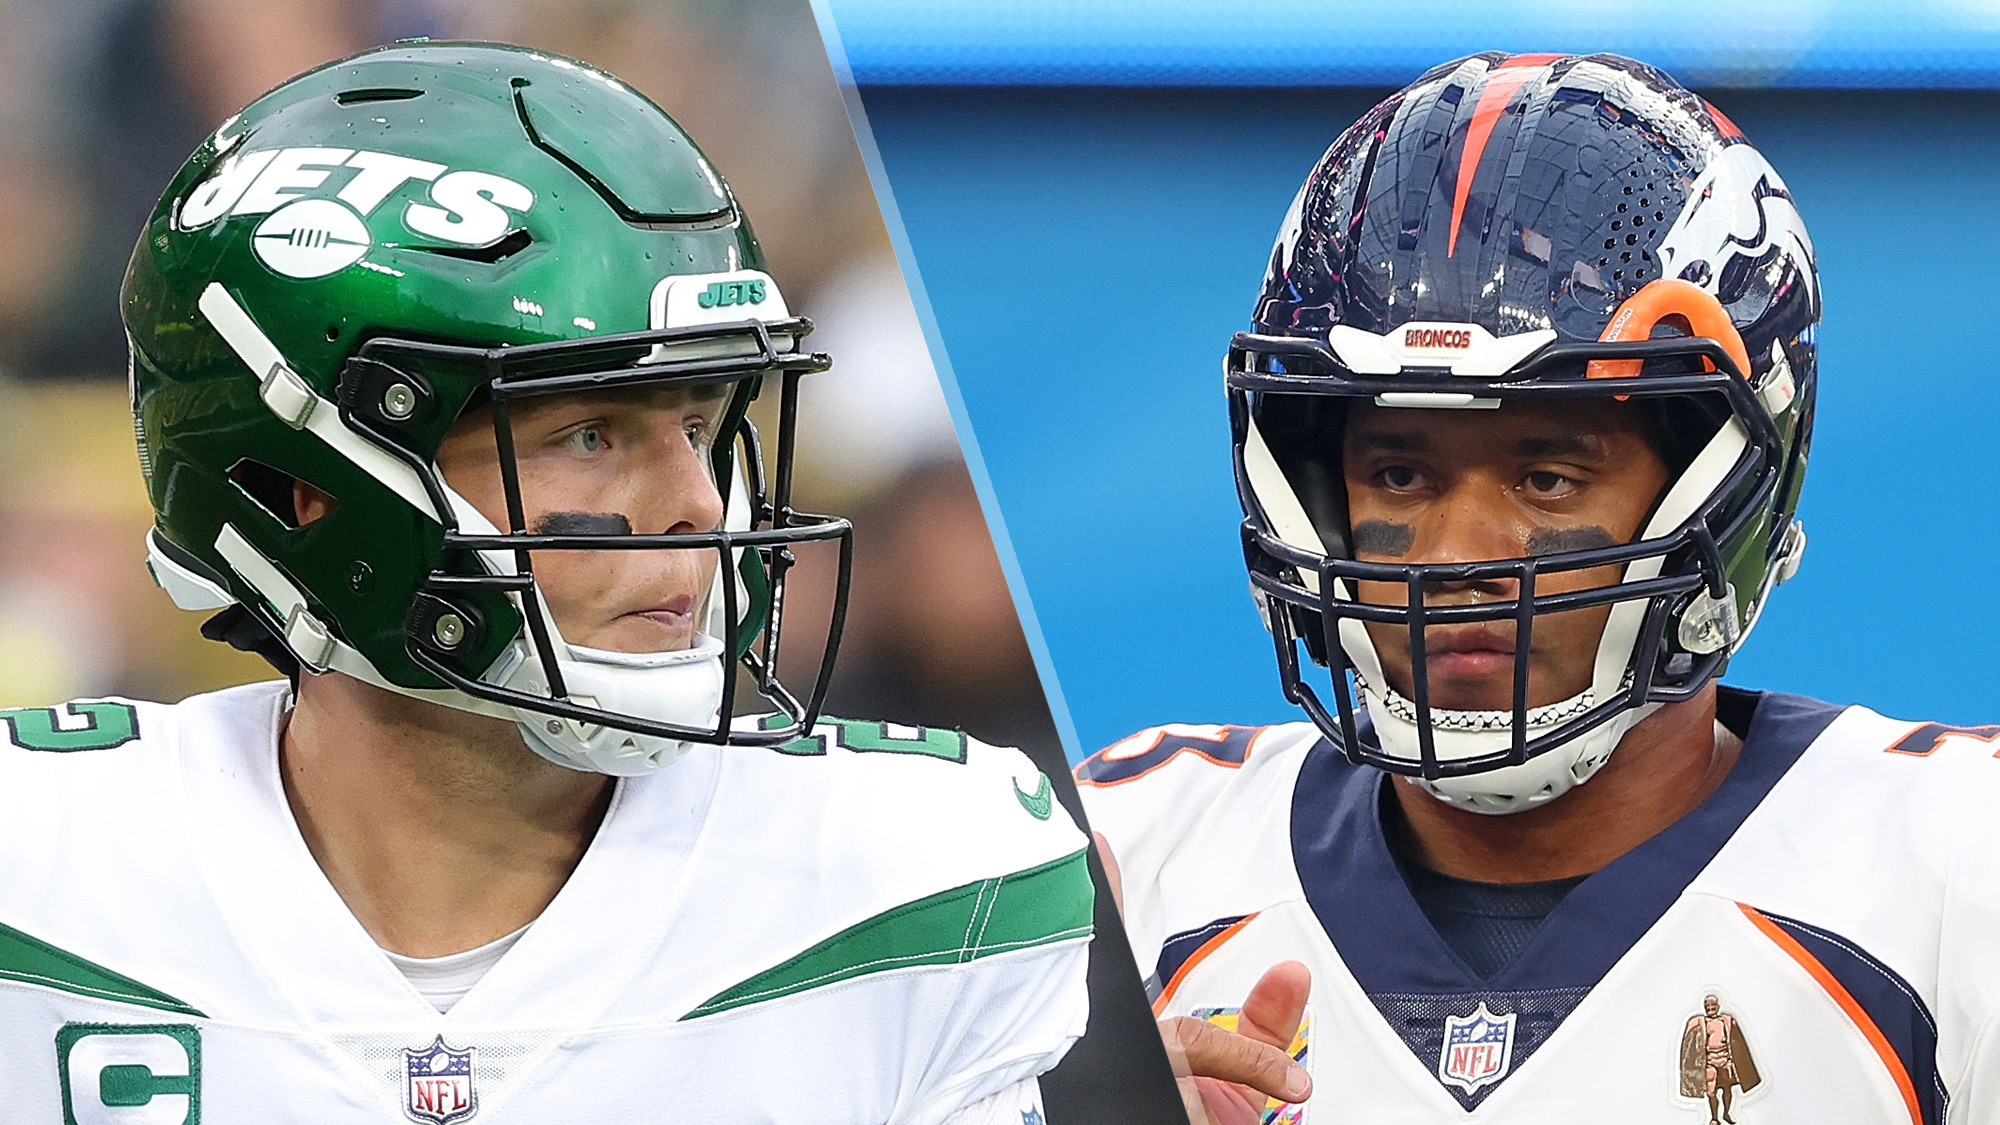 Jets vs Broncos live stream: How to watch NFL week 7 online today